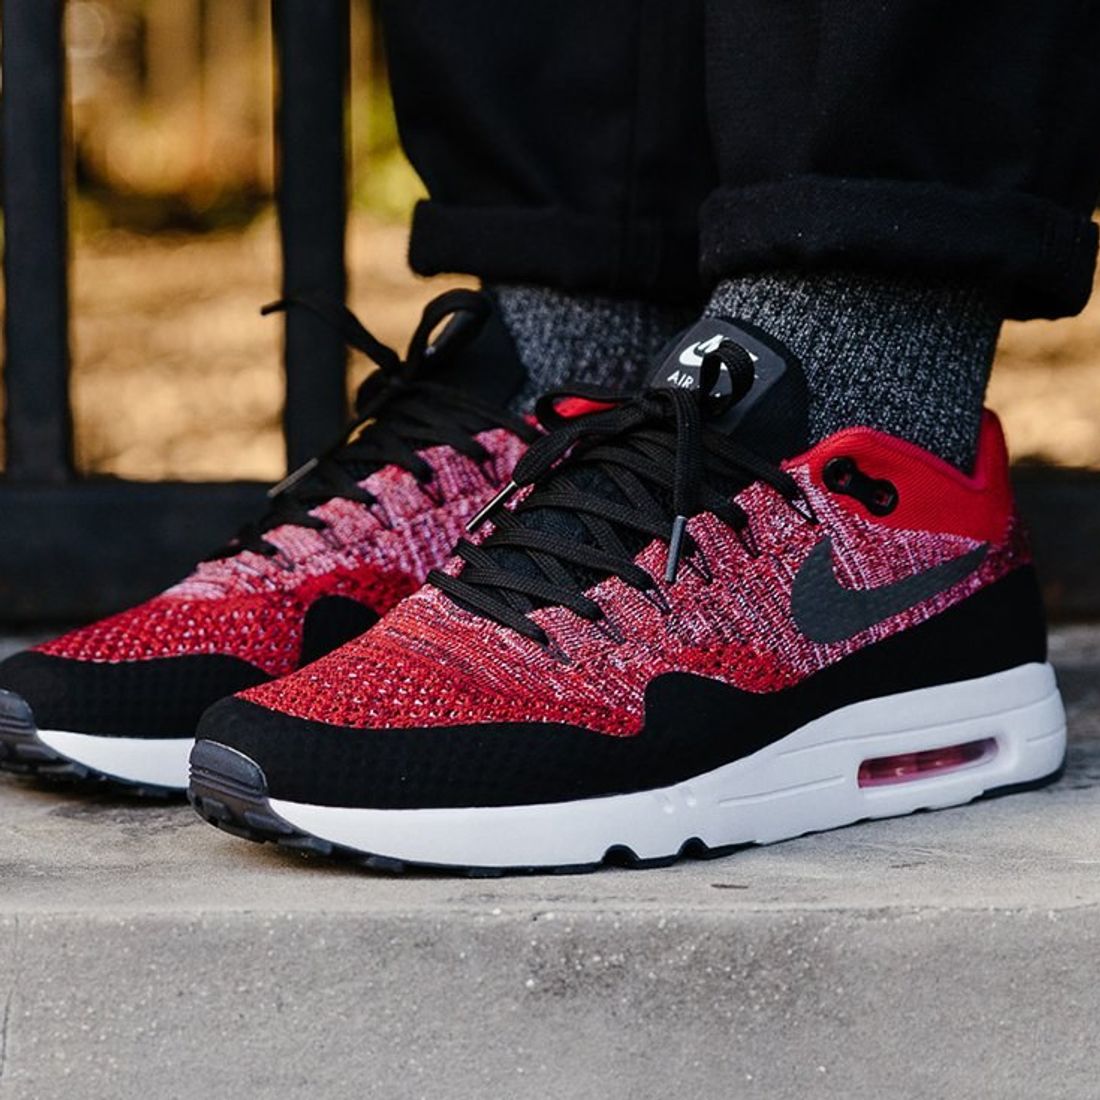 In response to the Aside map Nike Air Max 1 Ultra 2.0 Flyknit (University Red/Black) - Sneaker Freaker